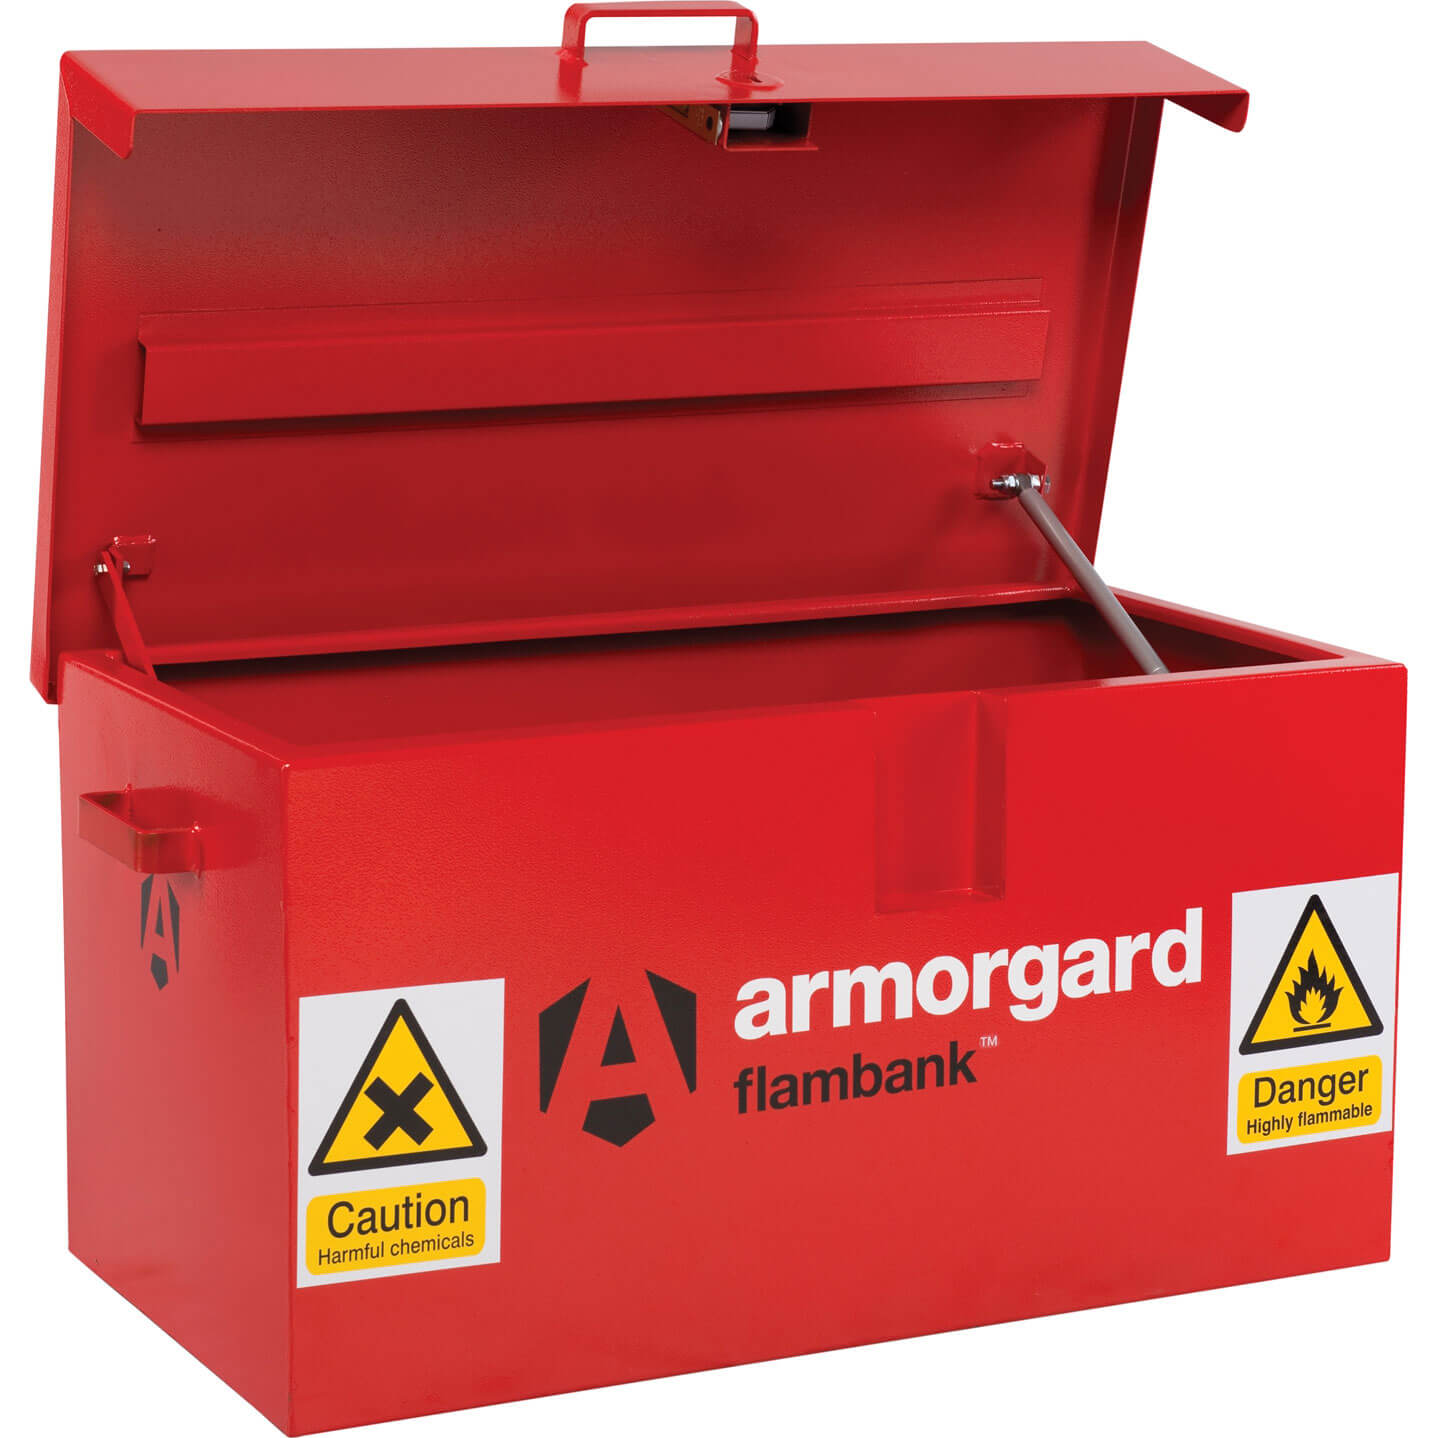 Image of Armorgard Flambank Chemical and Flammables Secure Van Storage Box 980mm 540mm 475mm